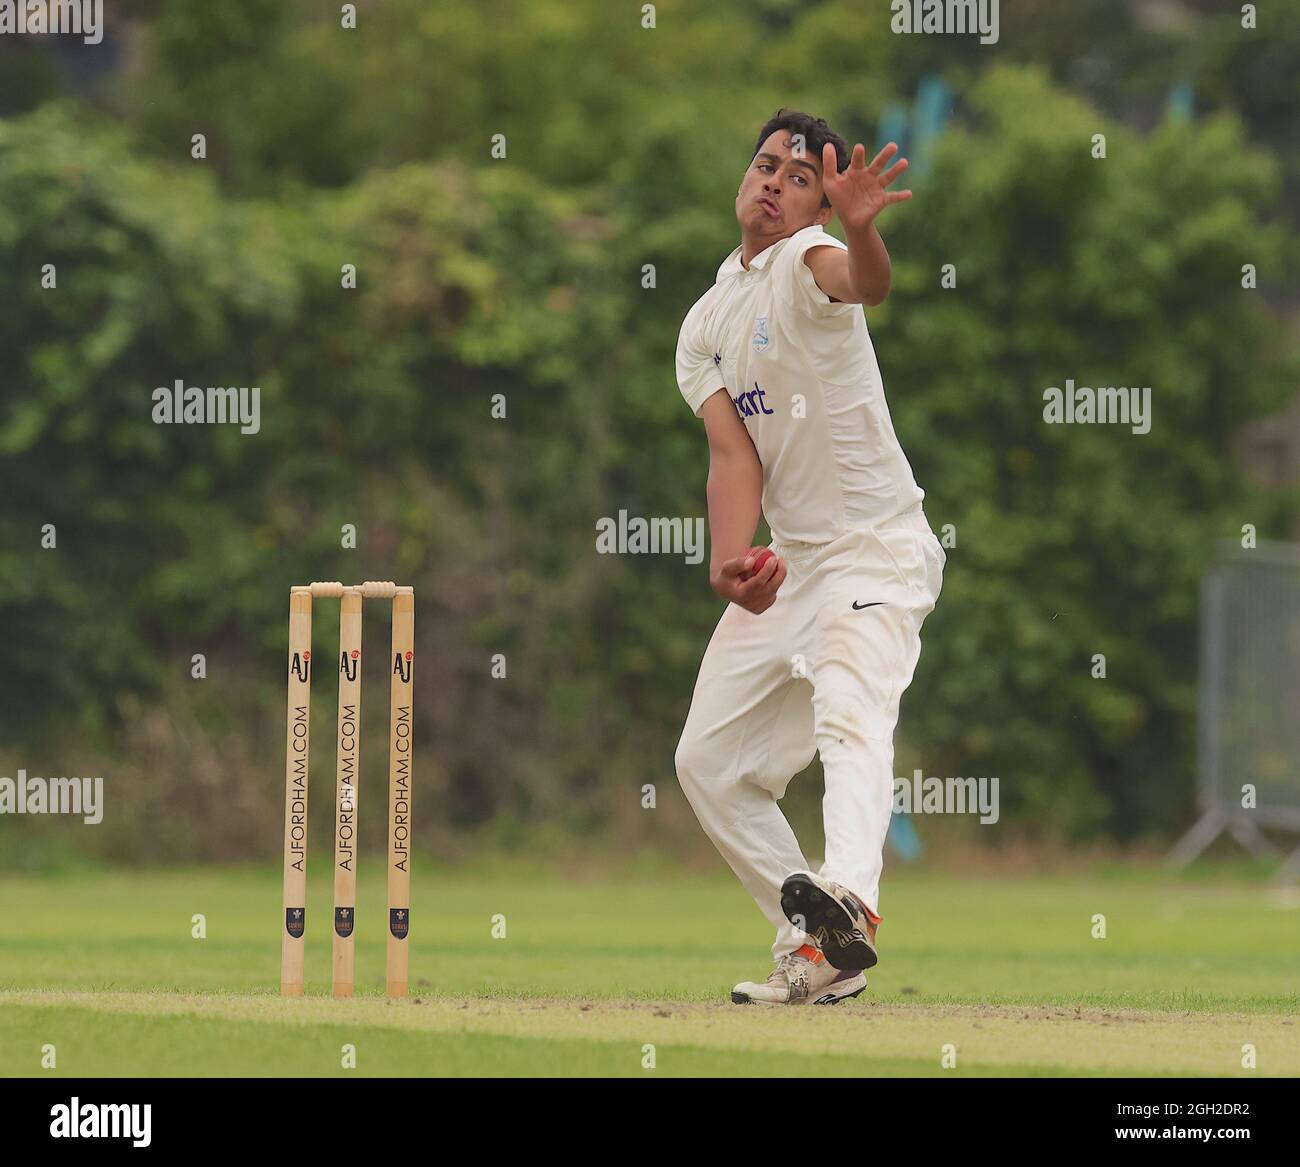 London, UK. 4 September, 2021. South London, UK.  Ahmed Khan bowling as Dulwich Cricket Club take on Dorking CC in the Surrey Championship Division 2 match at Dulwich, South London. David Rowe/ Alamy Live News Stock Photo